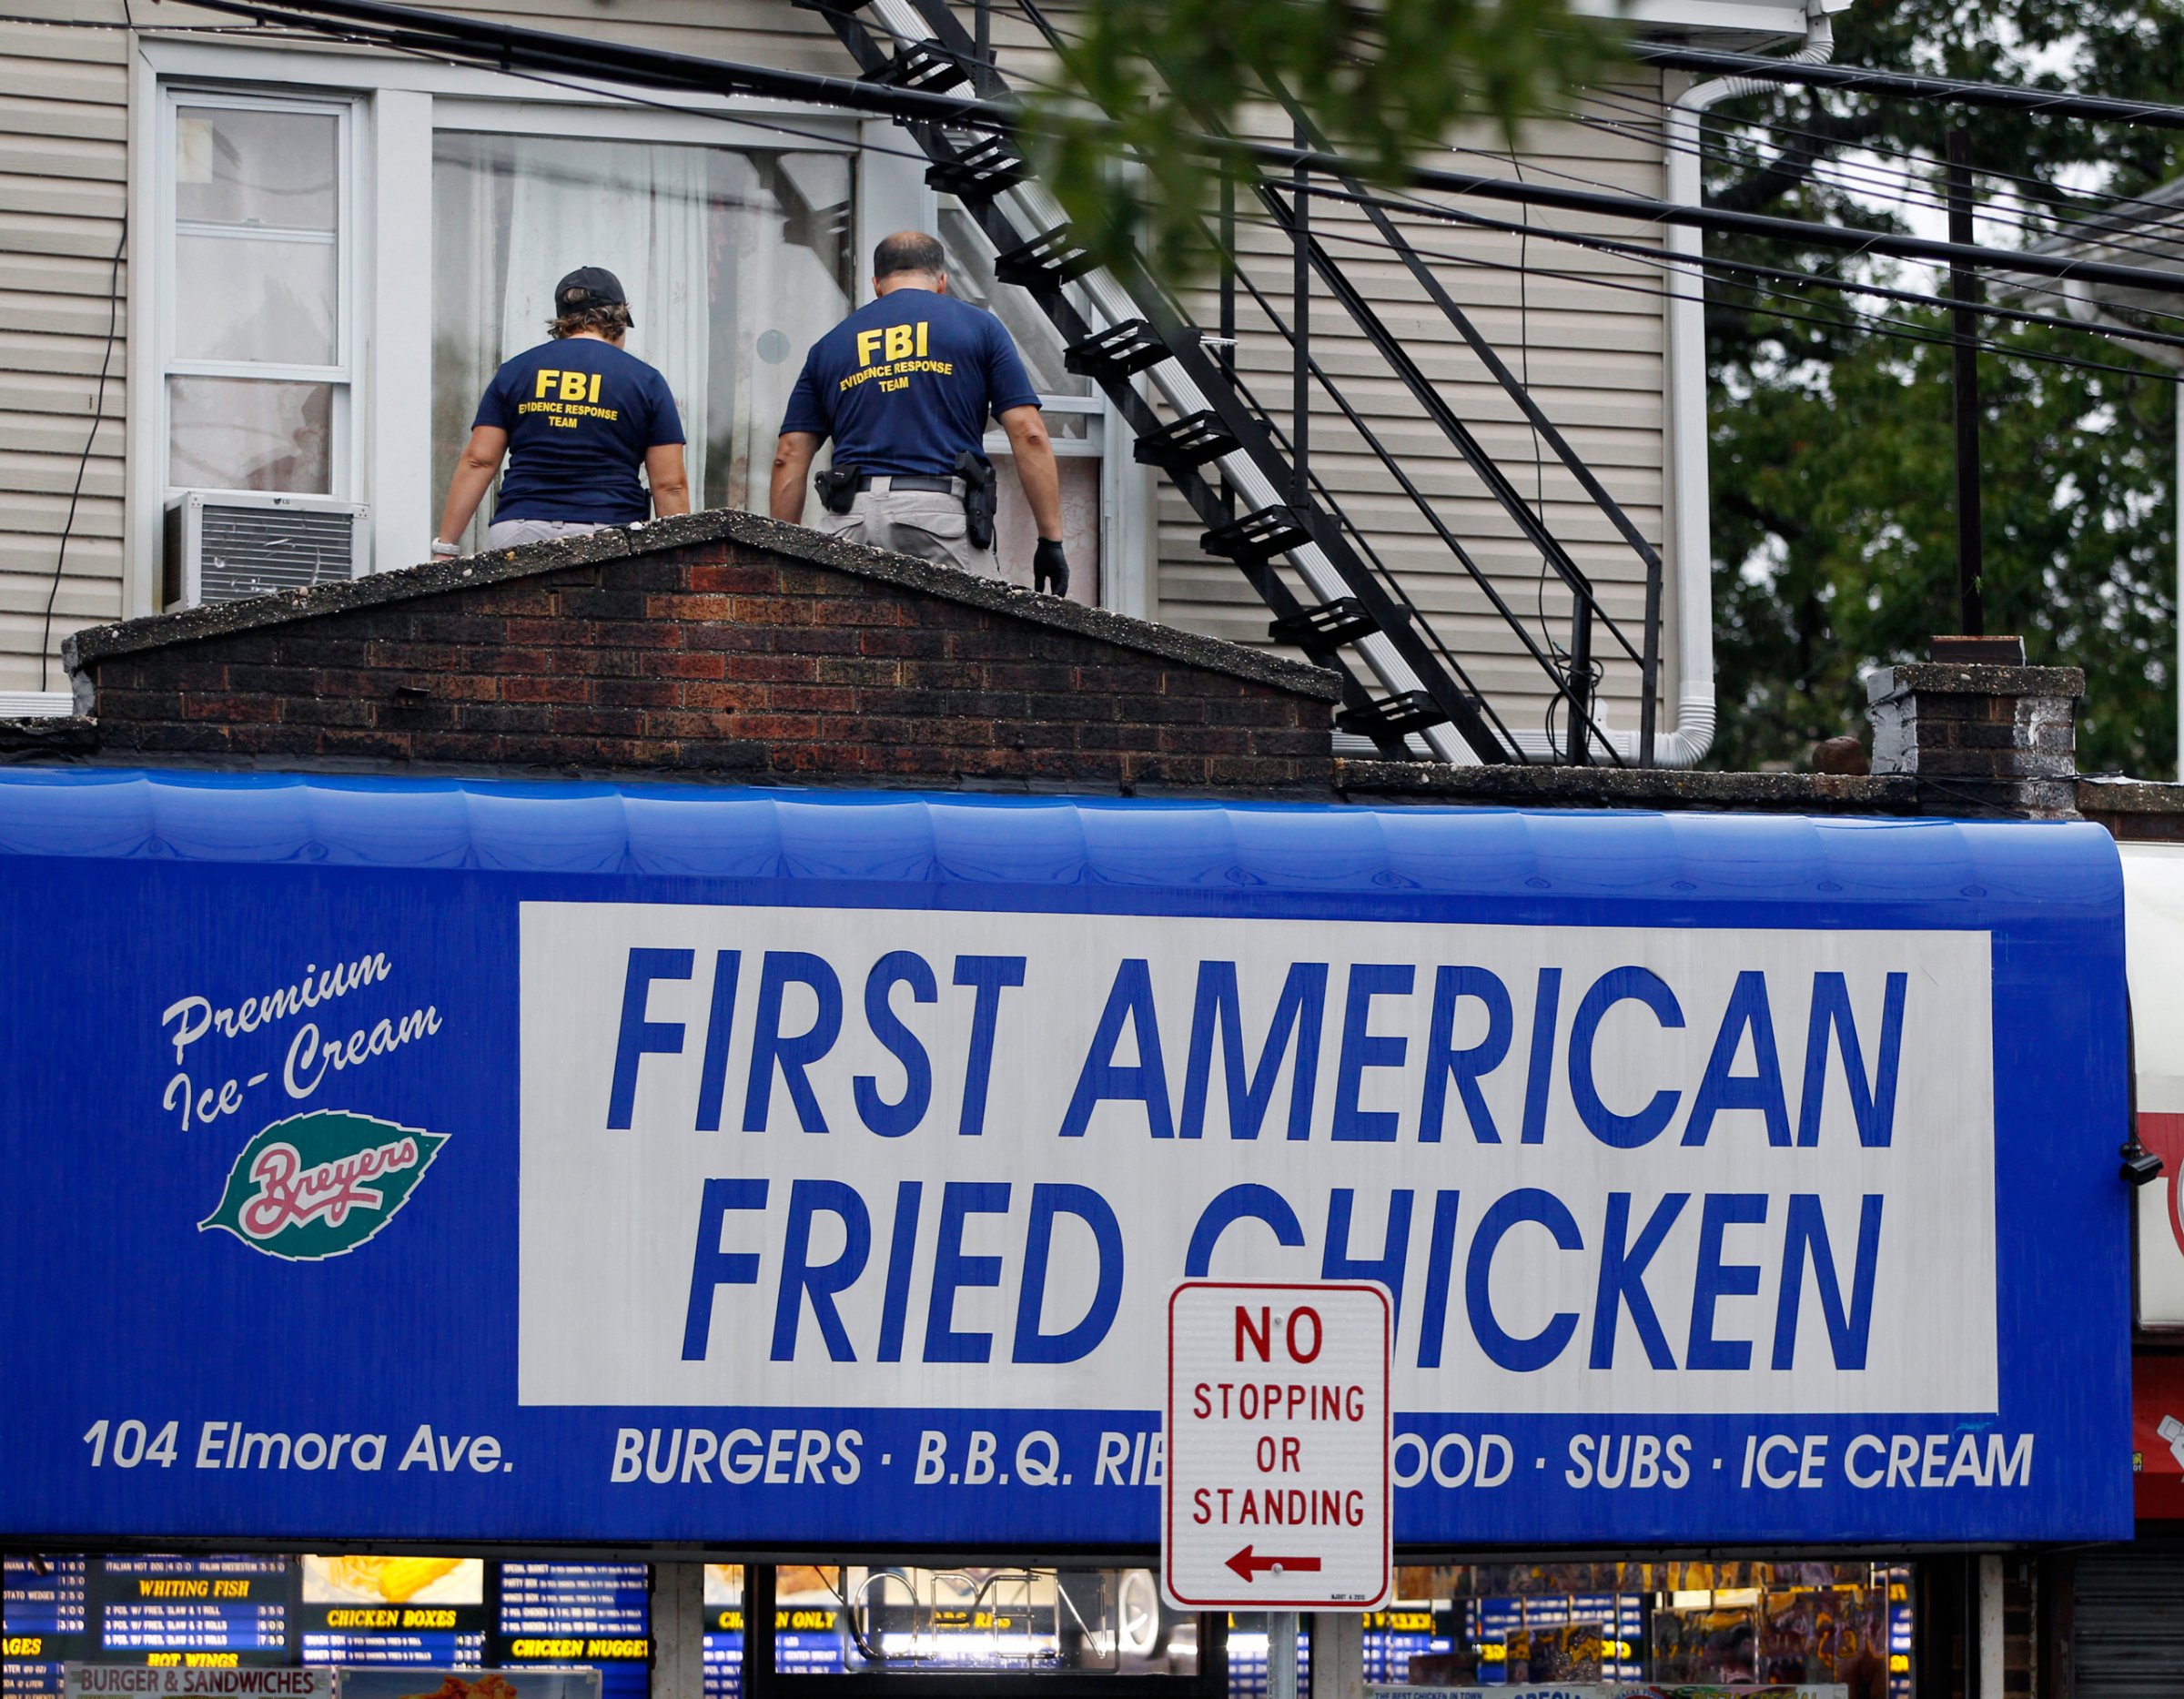 FBI agents walk around the roof outside an apartment during an investigation at a building Monday, Sept. 19, 2016, in Elizabeth, N.J. FBI agents are searching the apartment that is tied to Ahmad Khan Rahami wanted for questioning in the New York City bombing. (AP Photo/Mel Evans)